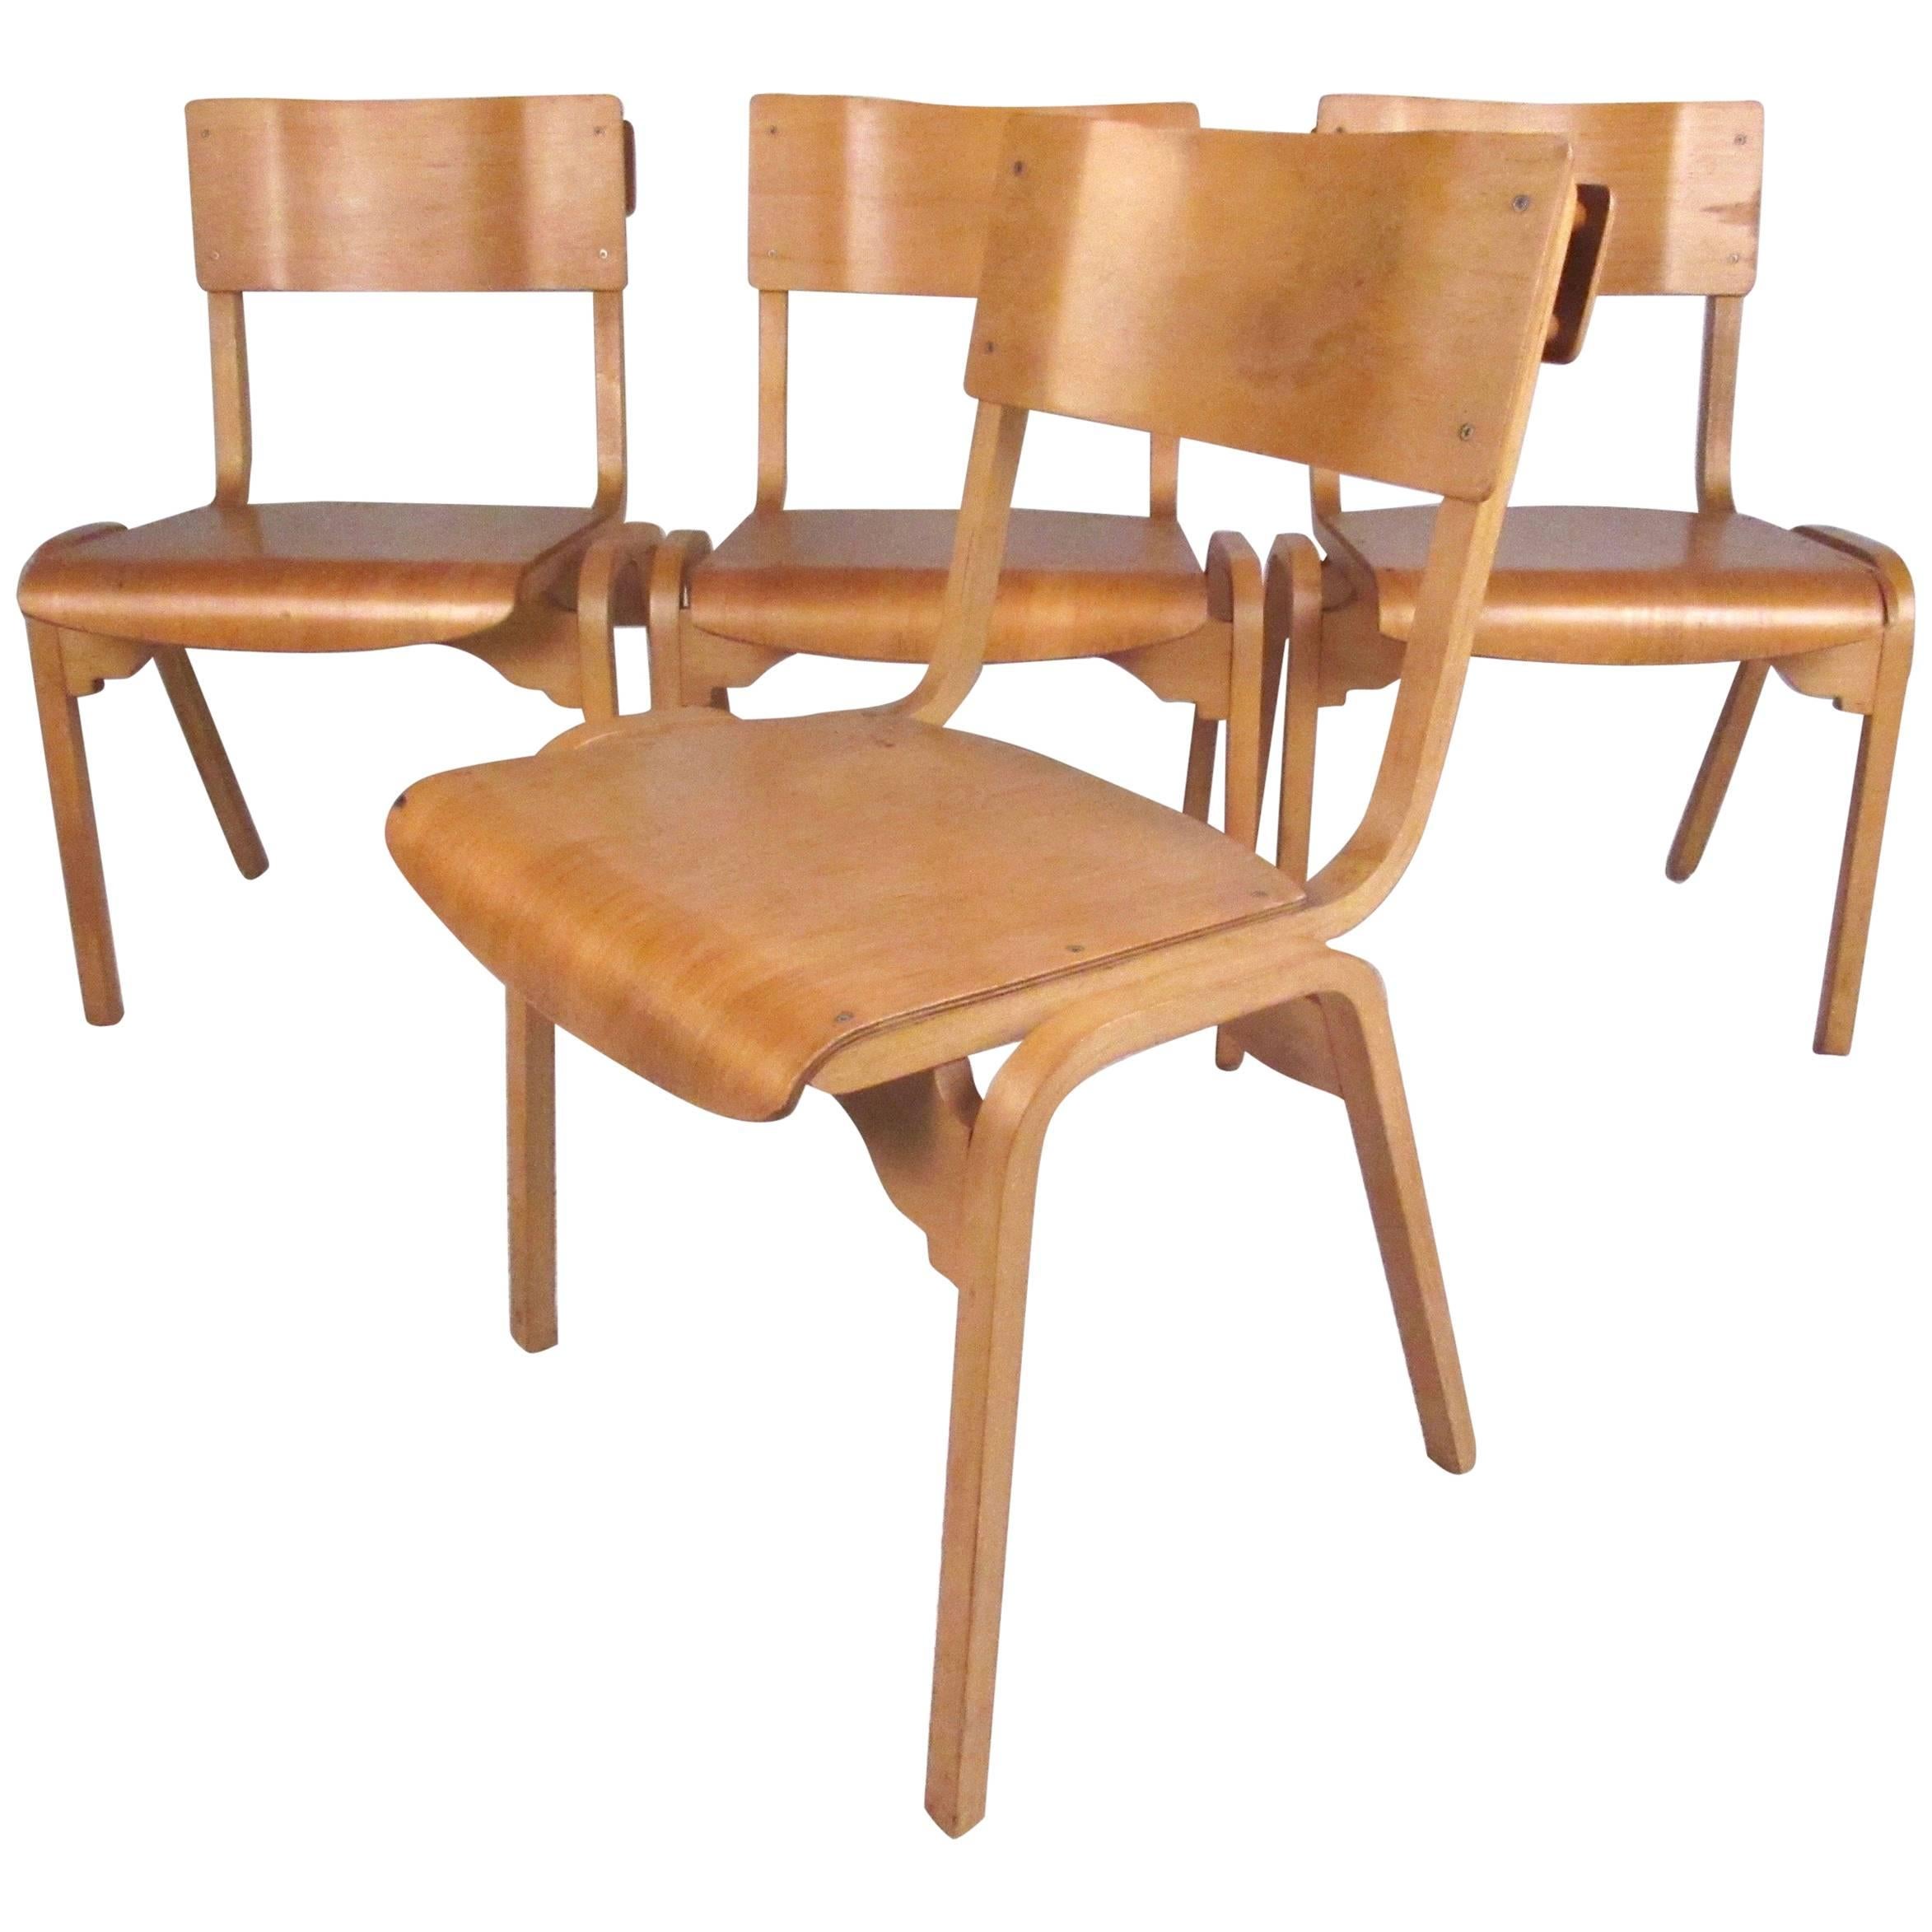 Set of Vintage Modern Bentwood Student Chairs